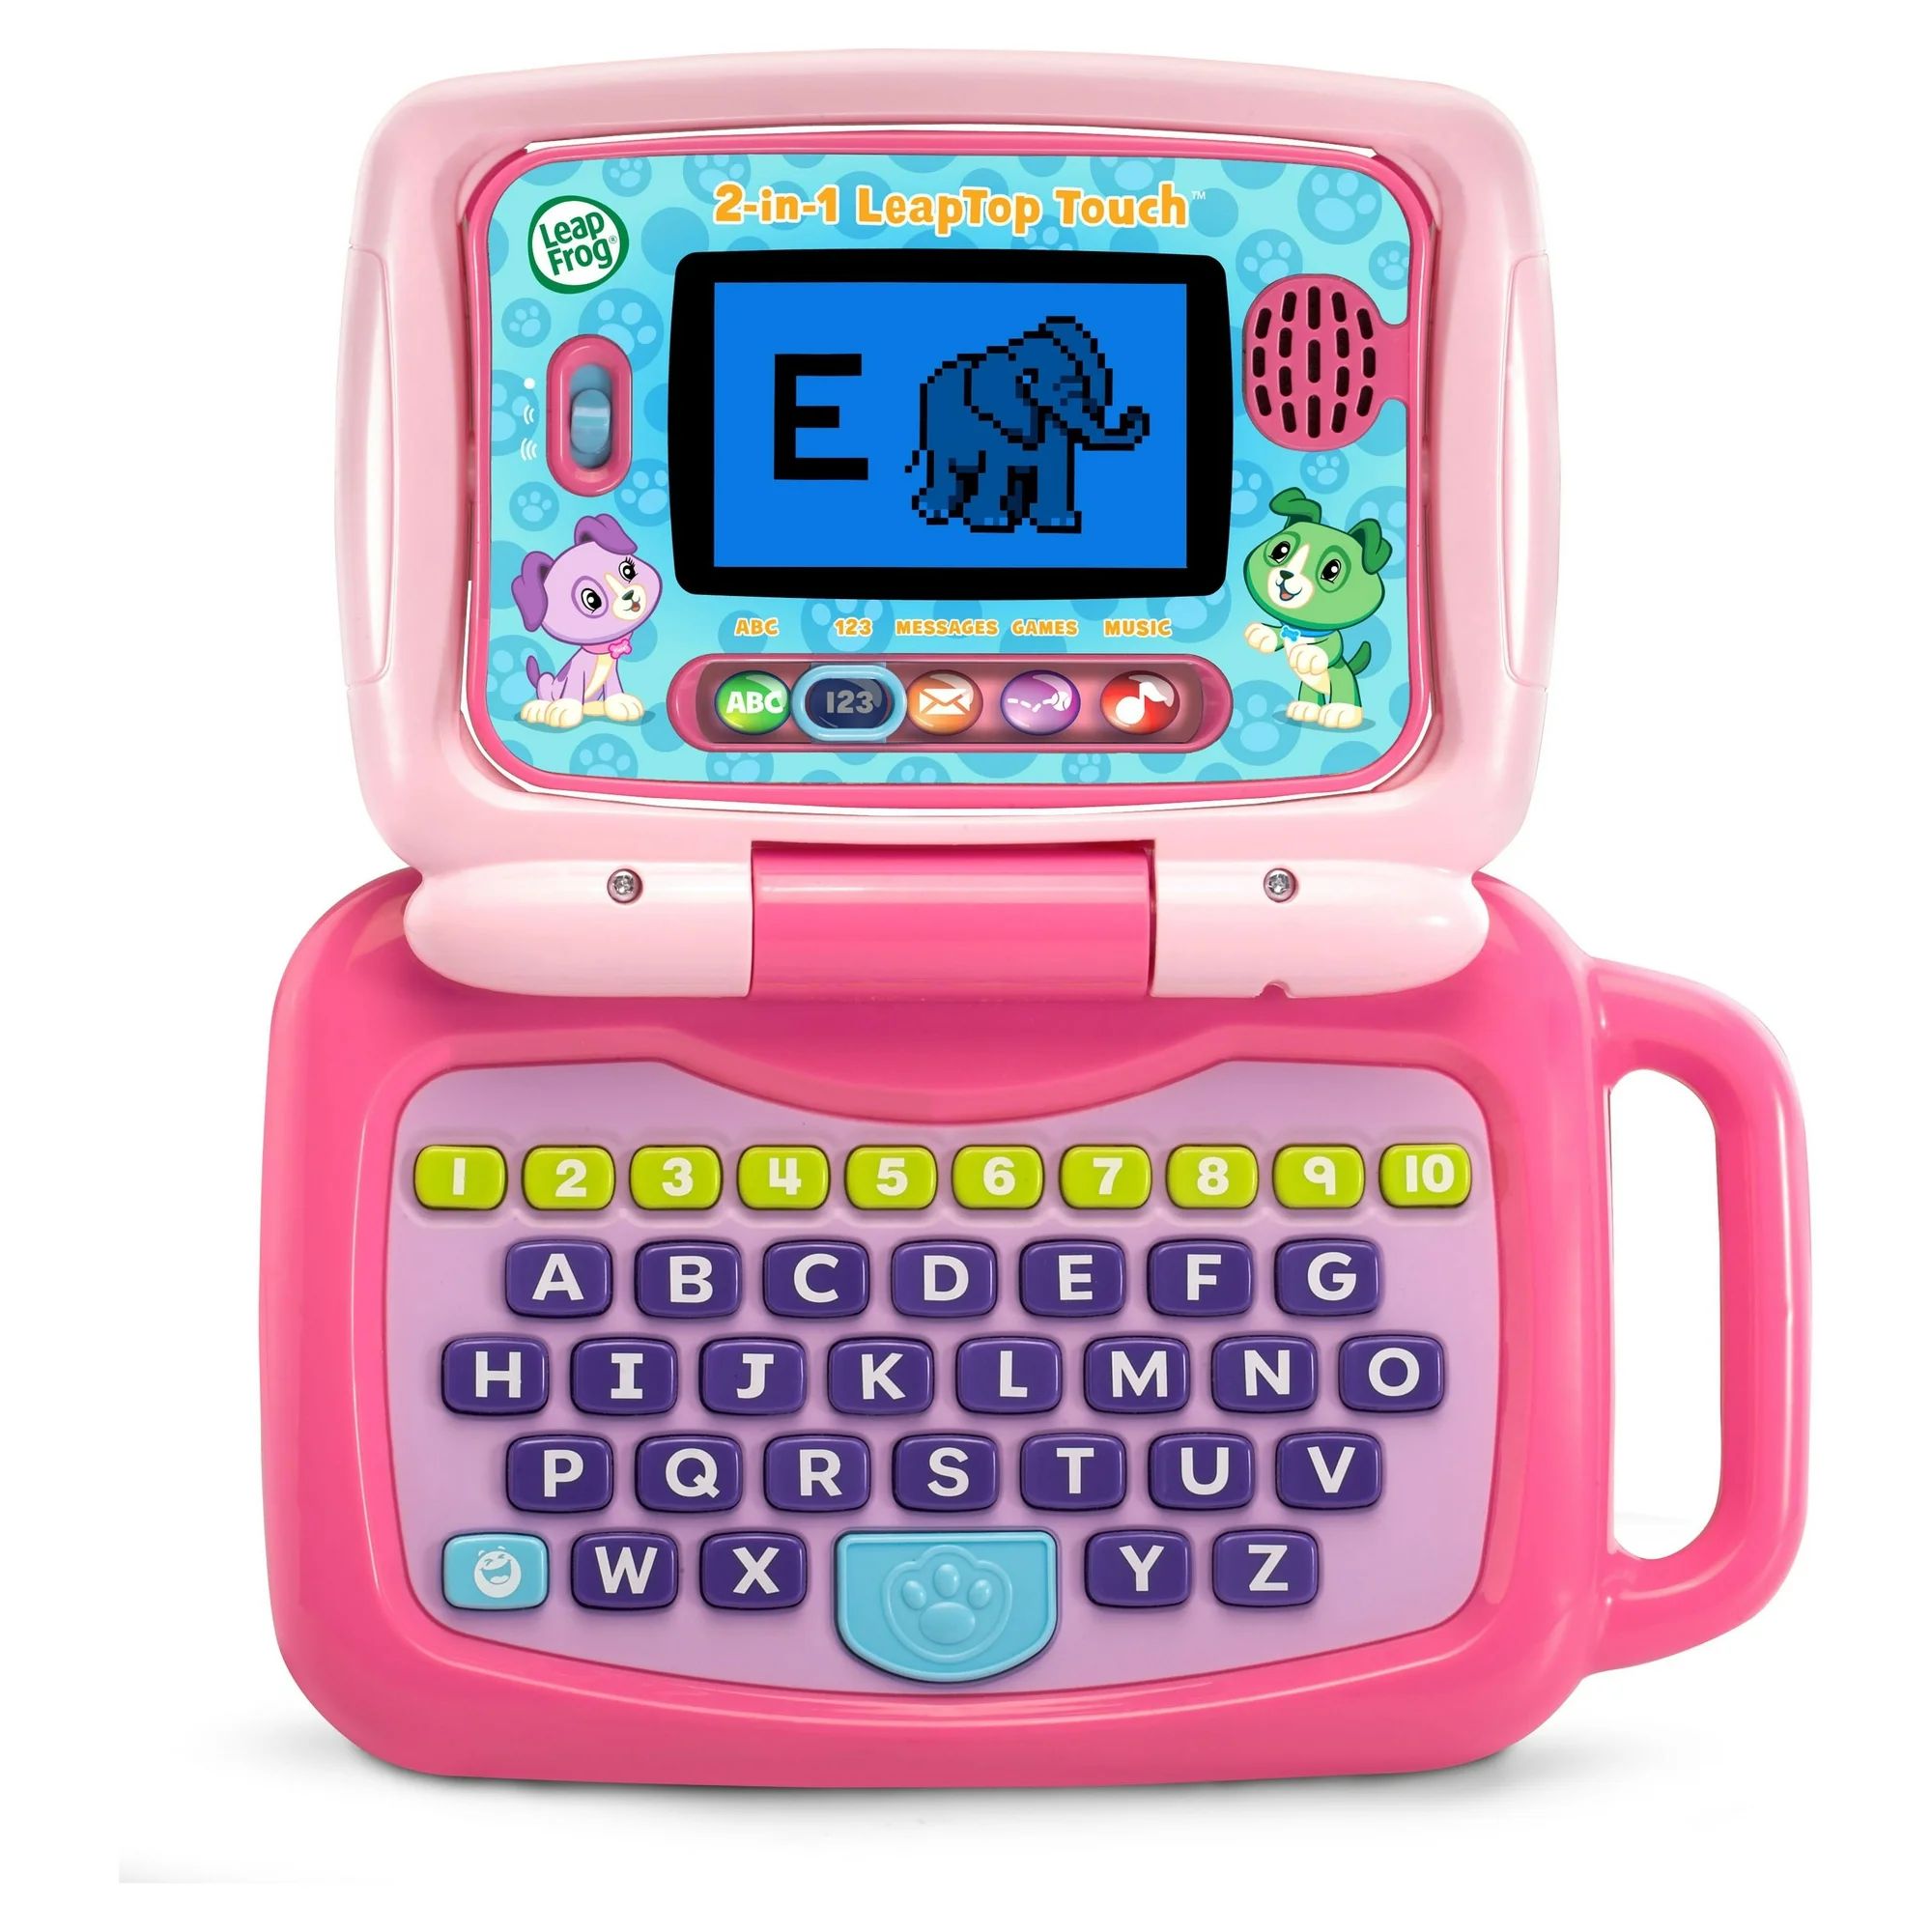 LeapFrog 2-in-1 LeapTop Touch for Toddlers, Electronic Learning System, Teaches Letters, Numbers | Walmart (US)